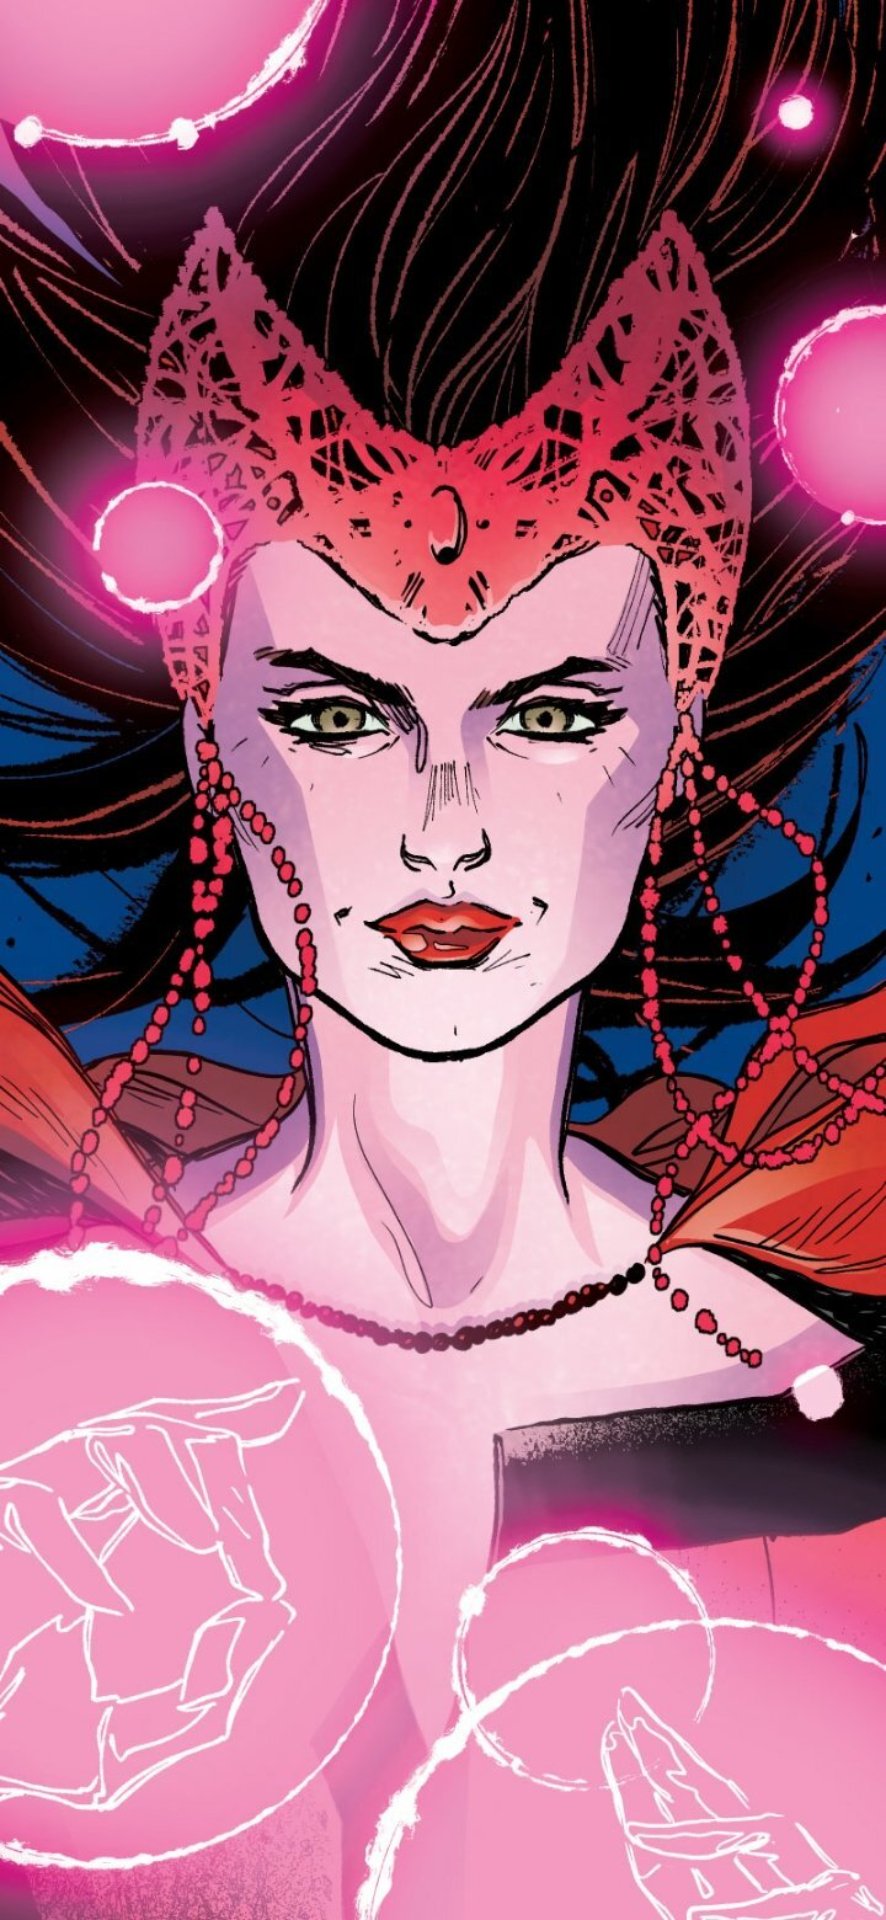 Who Is The Scarlet Witch Infinity Comic (2022) #1, Comic Issues